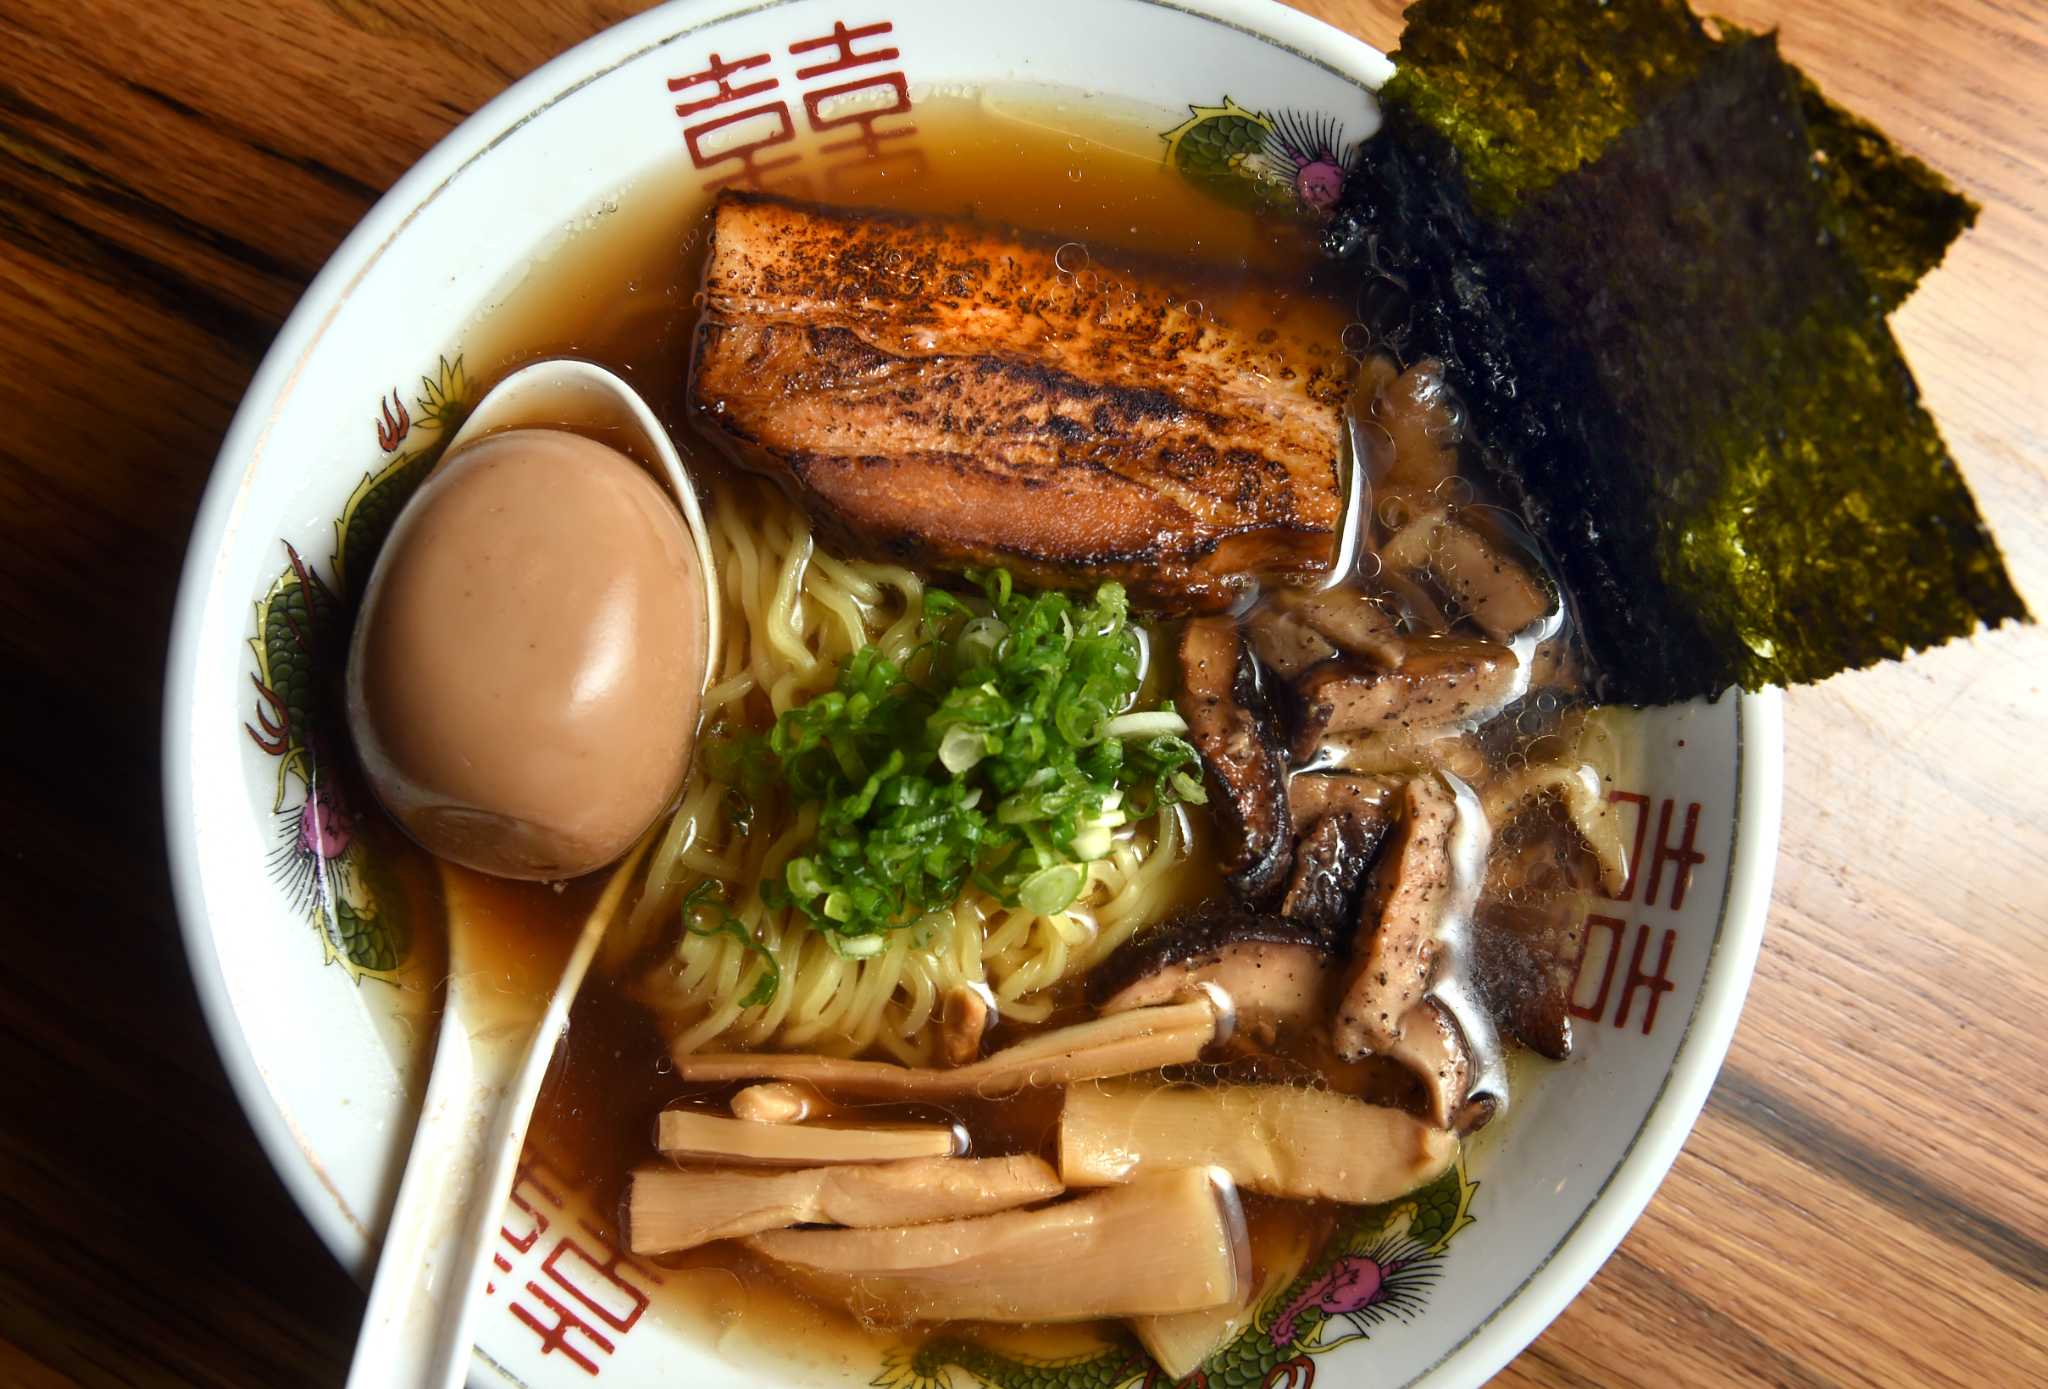 Menya-Gumi in New Haven was born of love for ramen, Japanese food